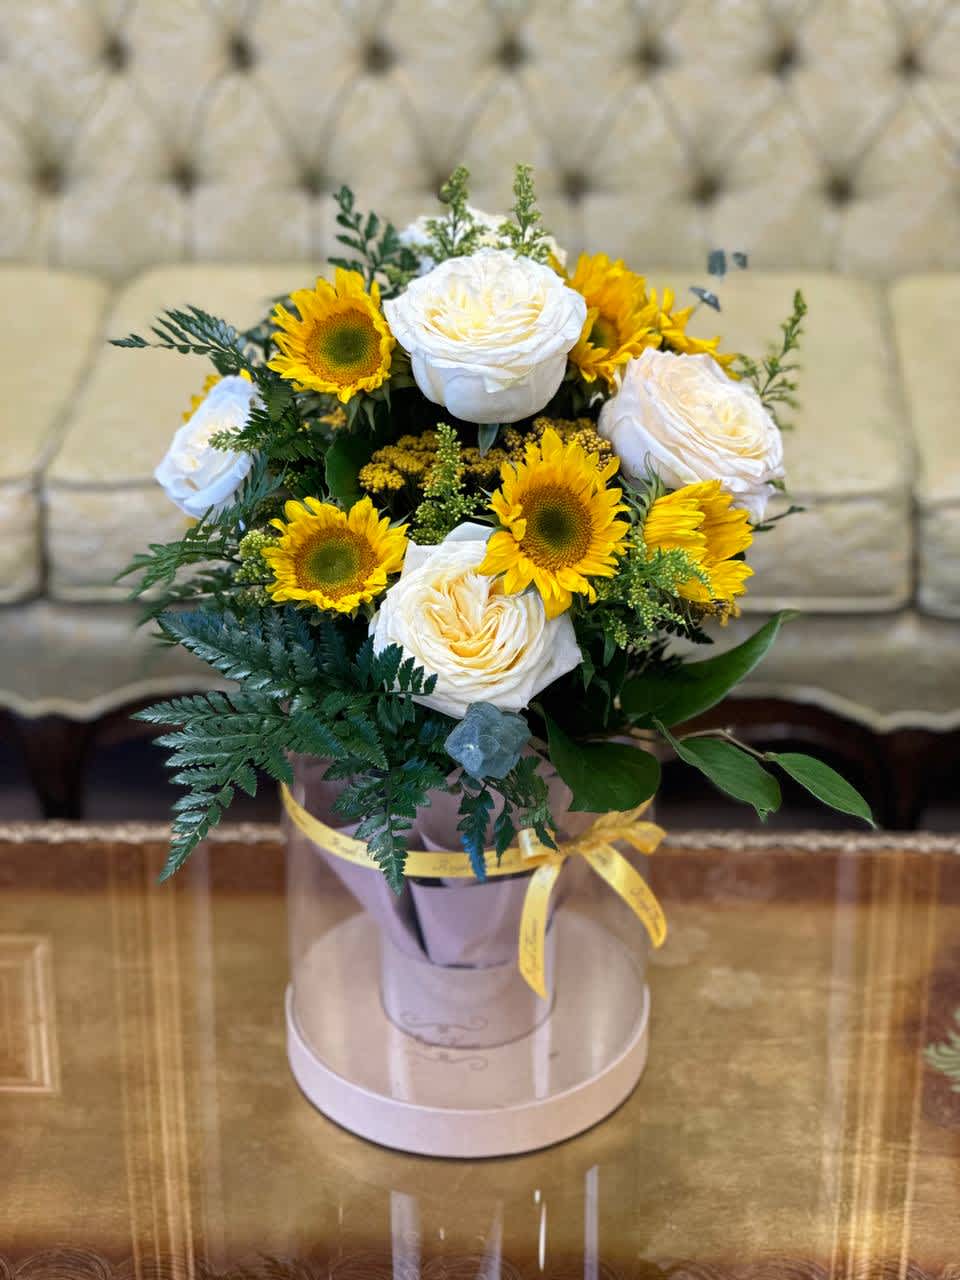 Fragrant Candlelight roses, bright and vibrant sunflowers and unique filler flowers are